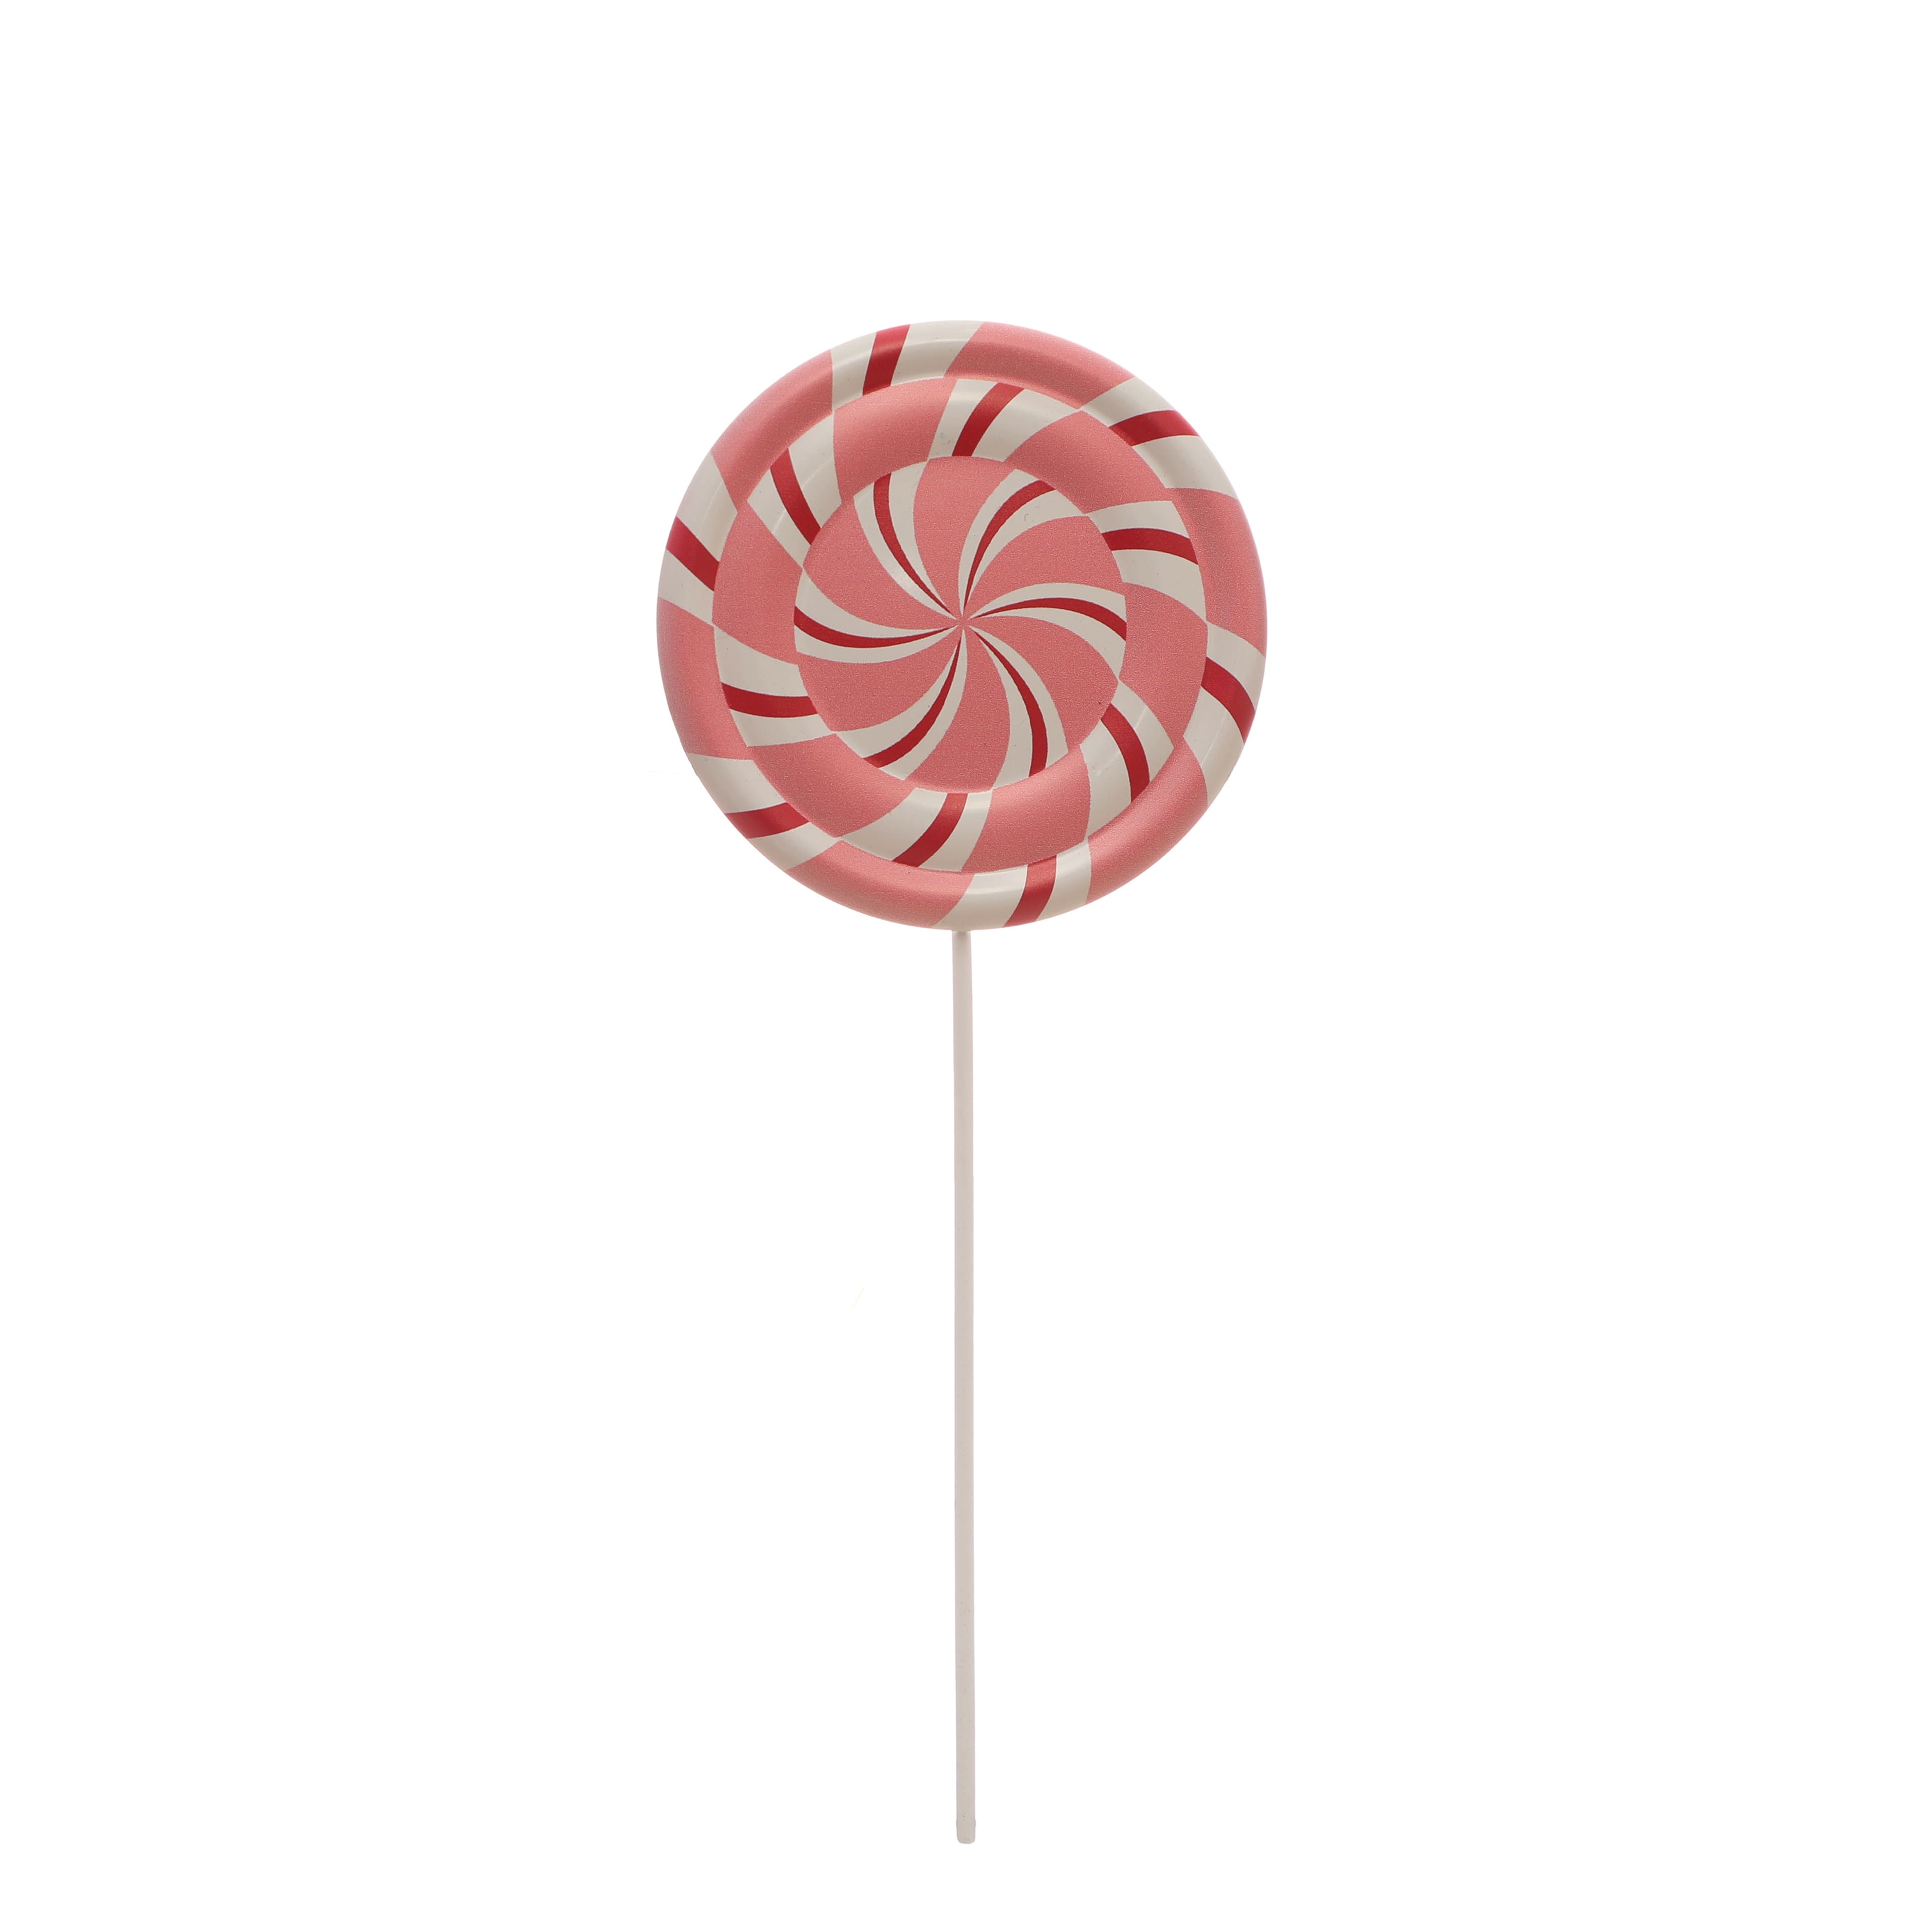 Stained Glass Lollipops with Colorful Swirls